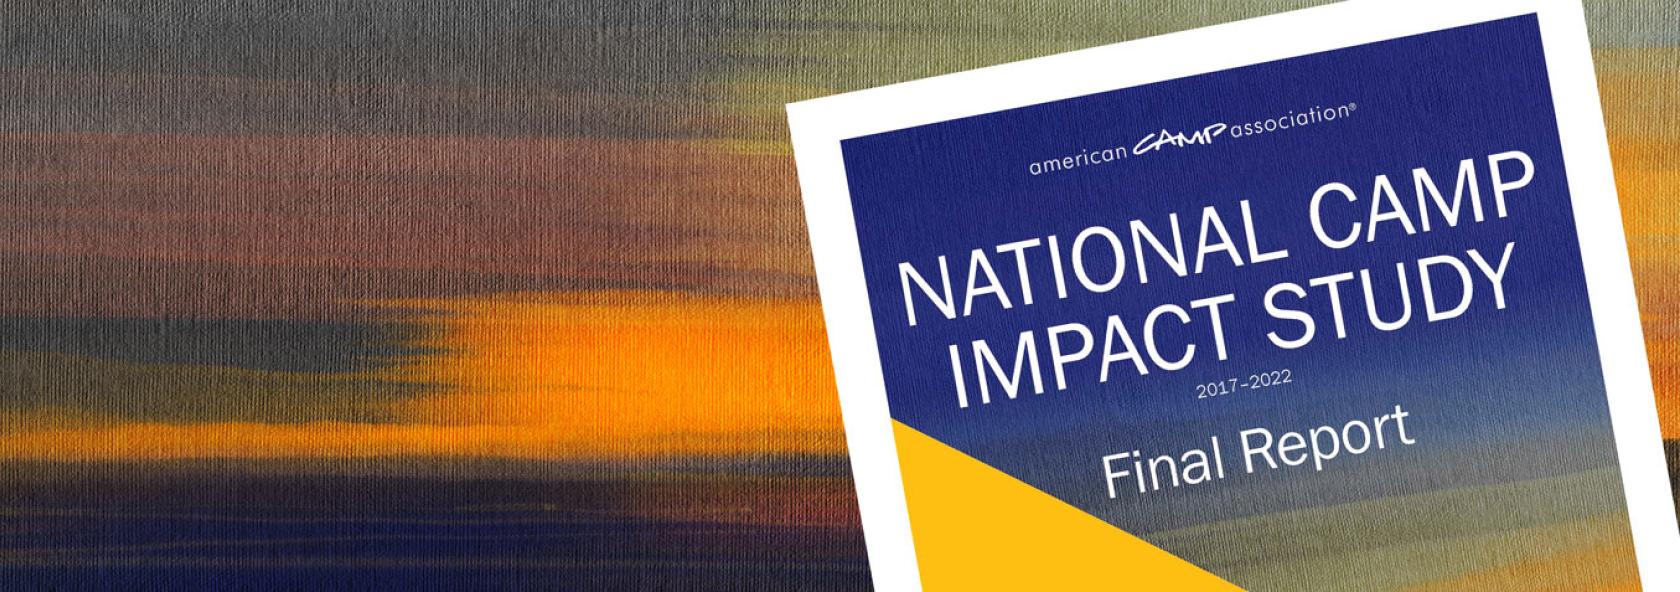 National camp impact study banner image